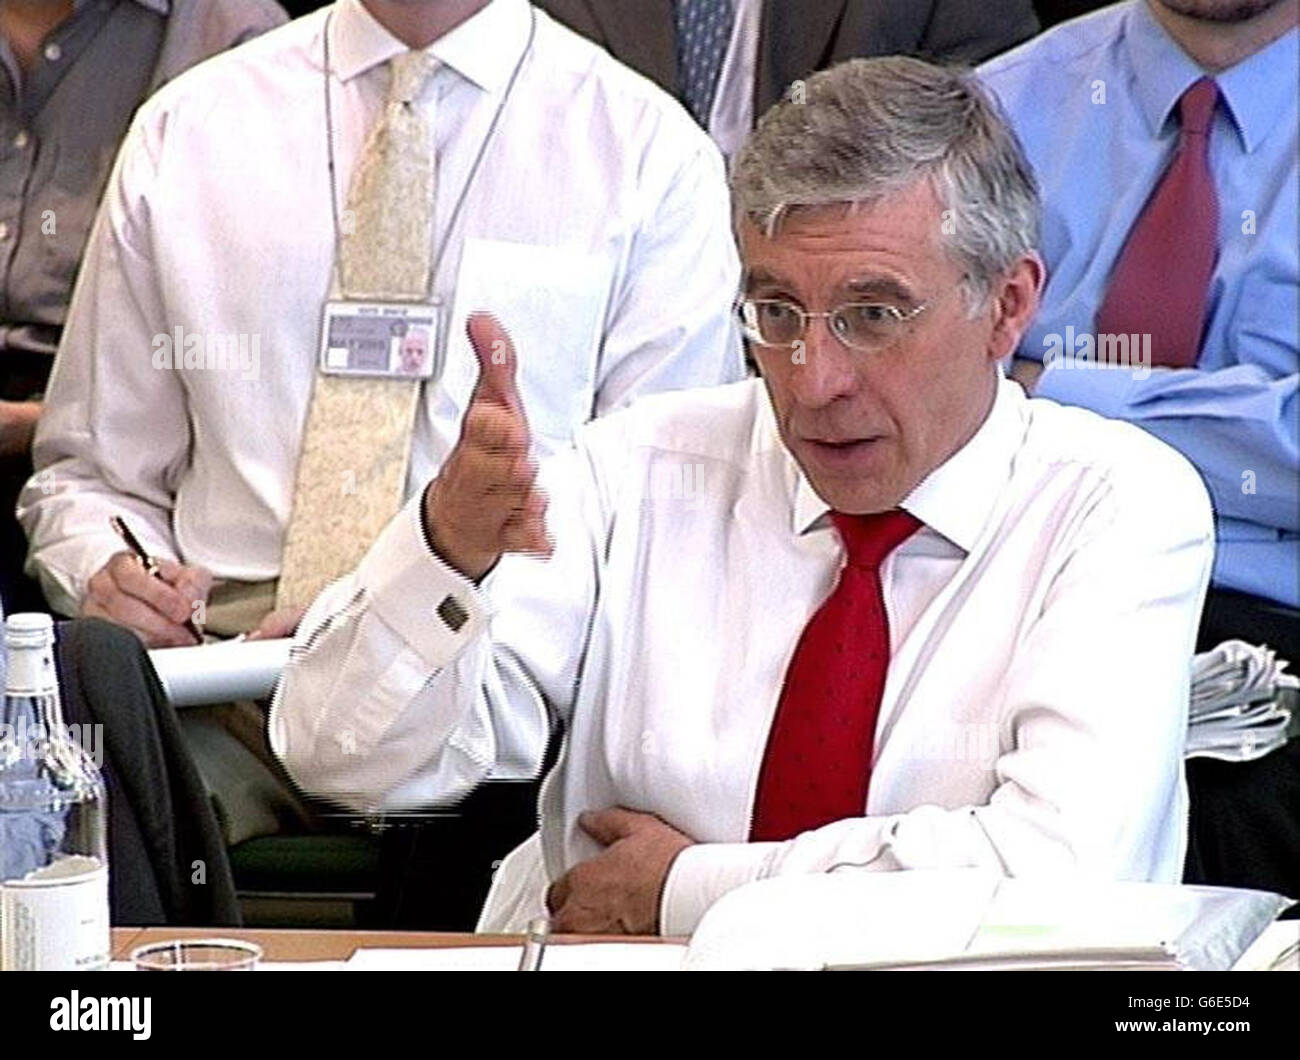 Foreign Secretary Jack Straw gives evidence to the Foreign Affairs Select Committee, regarding Downing Street's second dossier on Iraq's weapons of mass destruction. Straw told MPs: ' Of course it has been an embarrassment for the Government and lessons have been learned.' Stock Photo